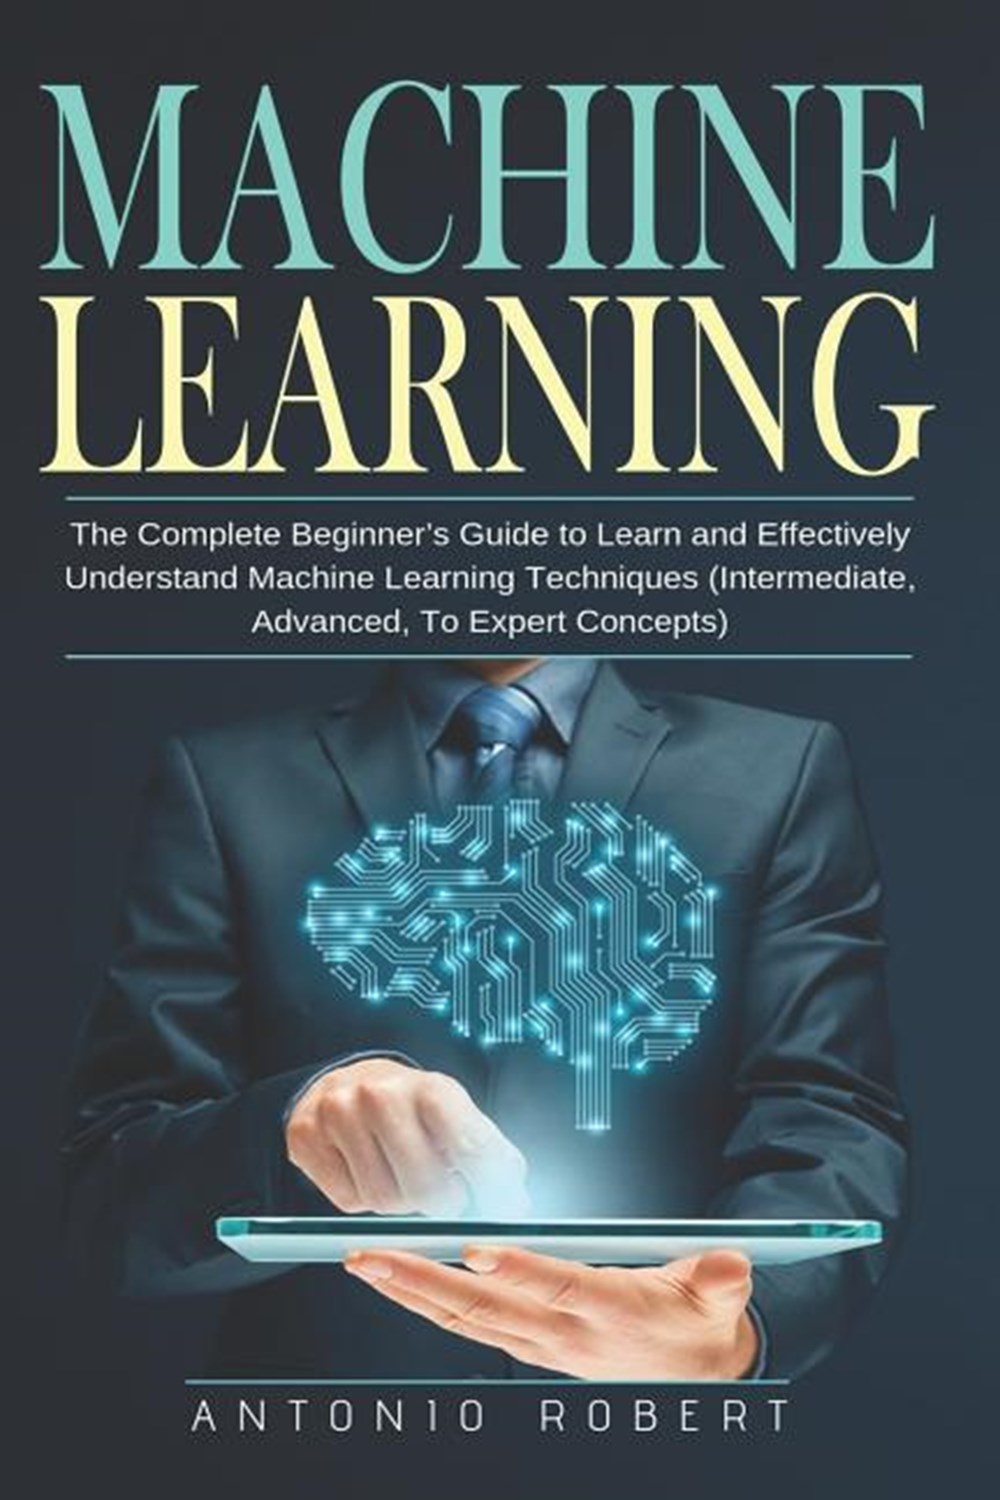 Machine learning: The Complete Beginner's Guide to Learn and Effectively Understand Machine Learning